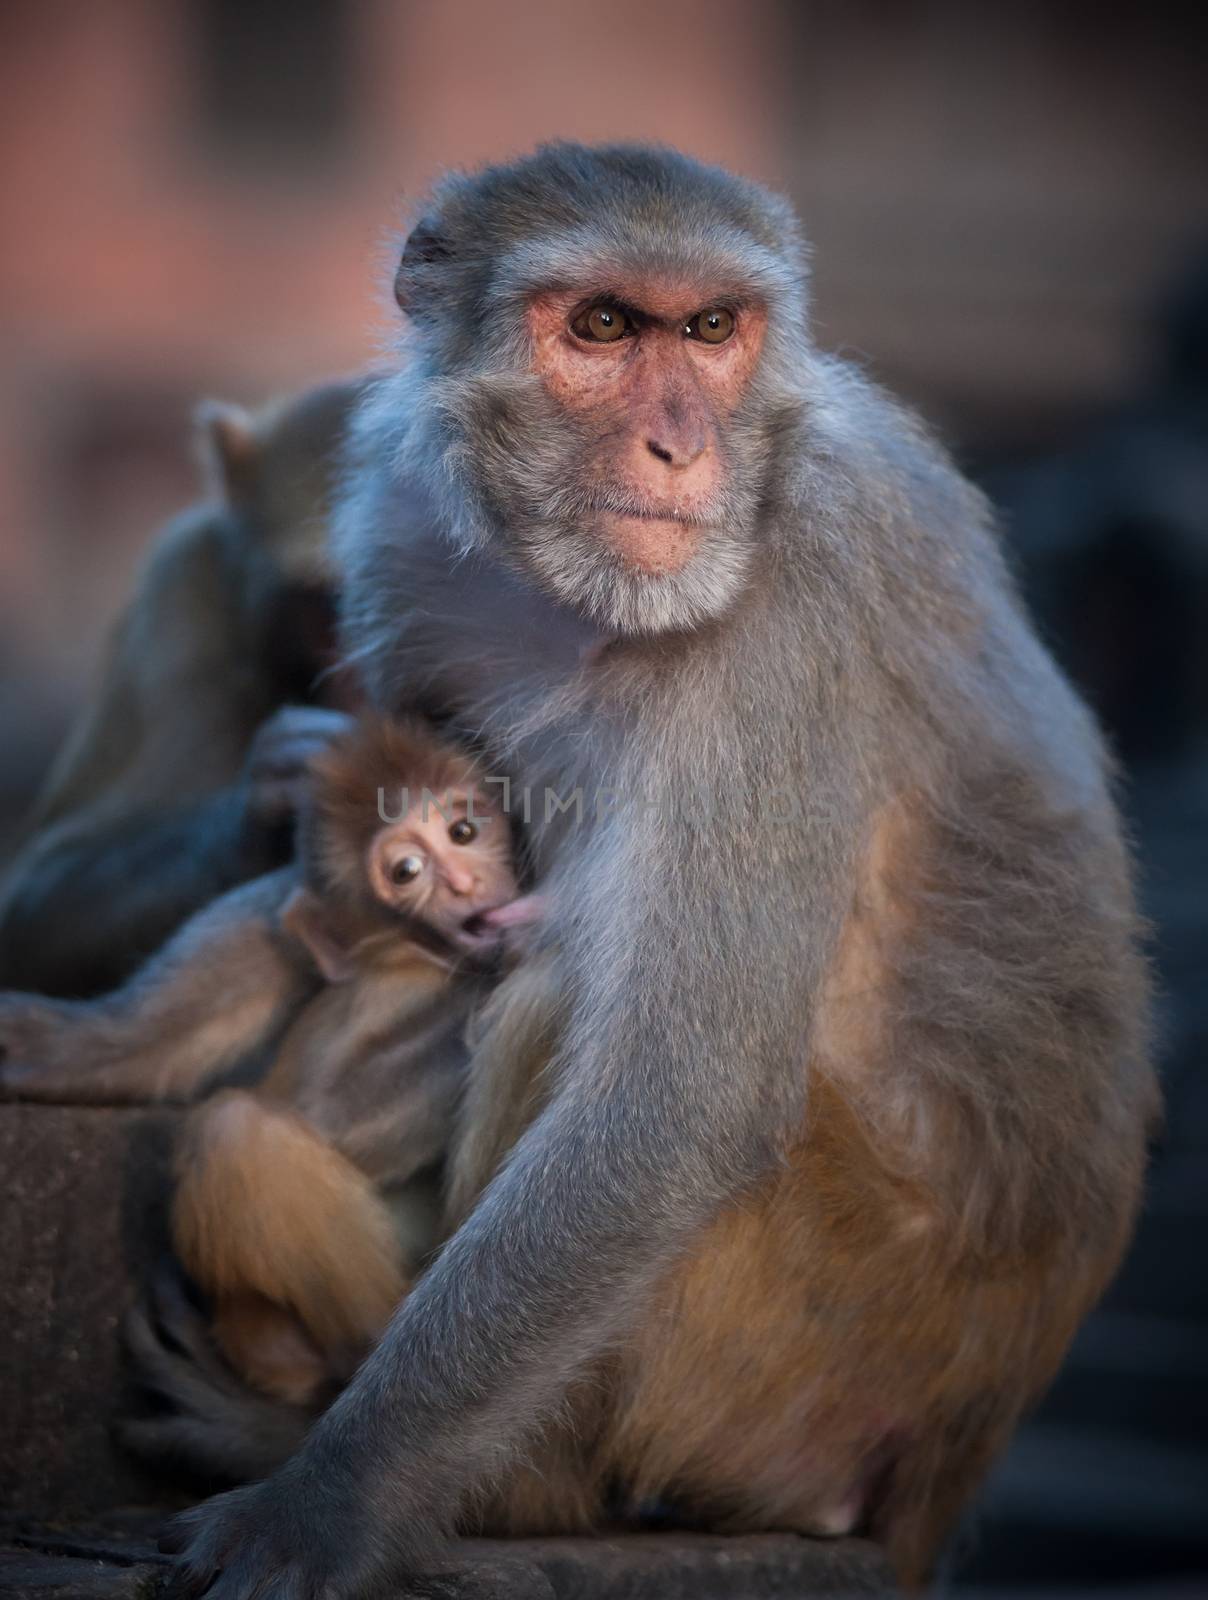 Mother Rhesus macaque nursing its baby. Shallow DOF, focus on female